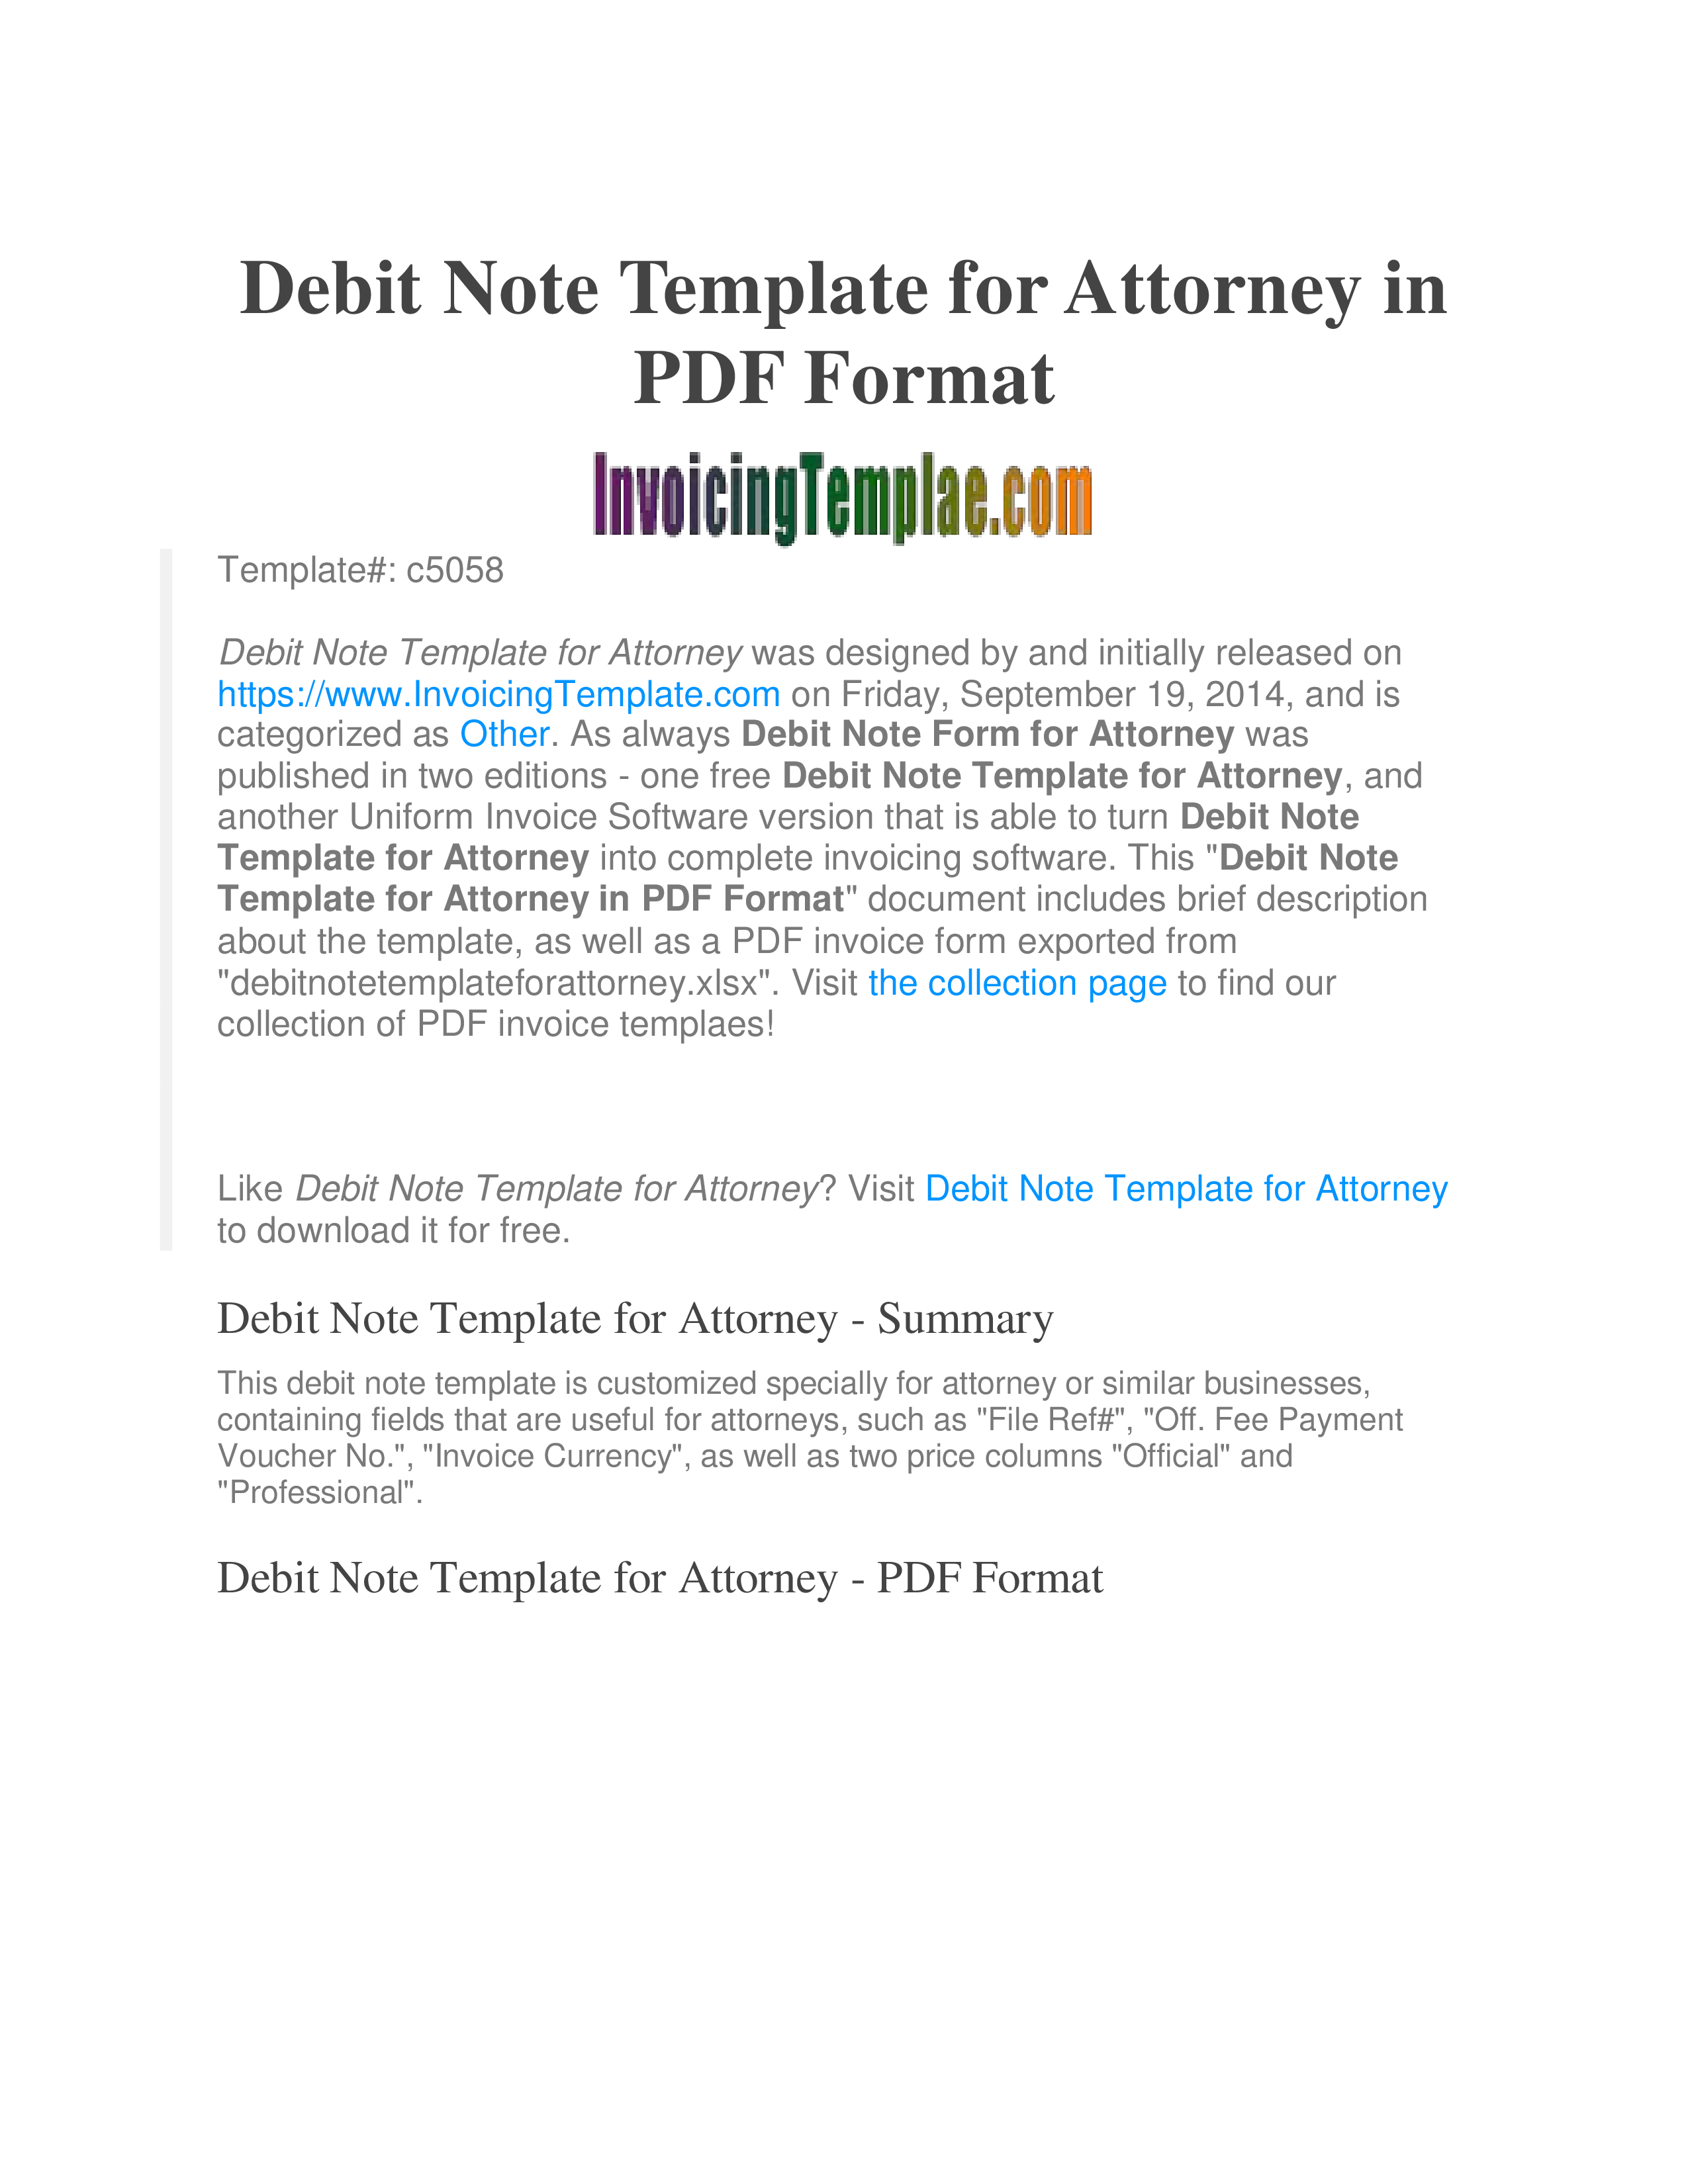 Debit Note Template for Attorney main image